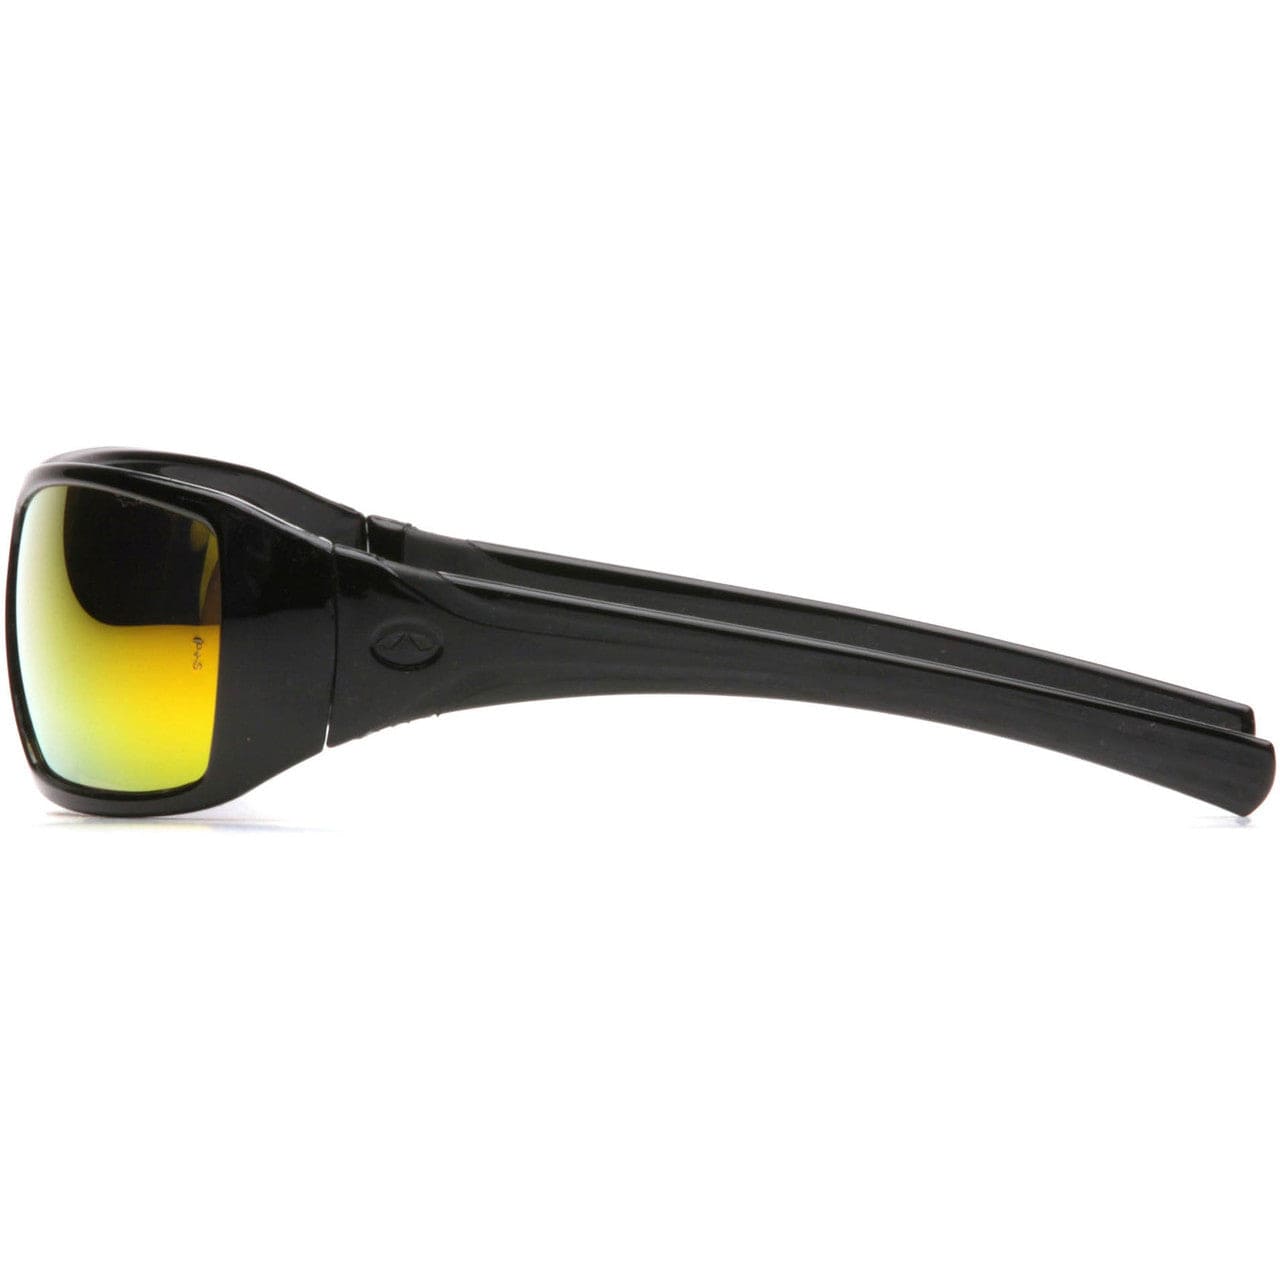 Pyramex Goliath Safety Glasses with Black Frame and Ice Orange Mirror Lens SB5645D Side View